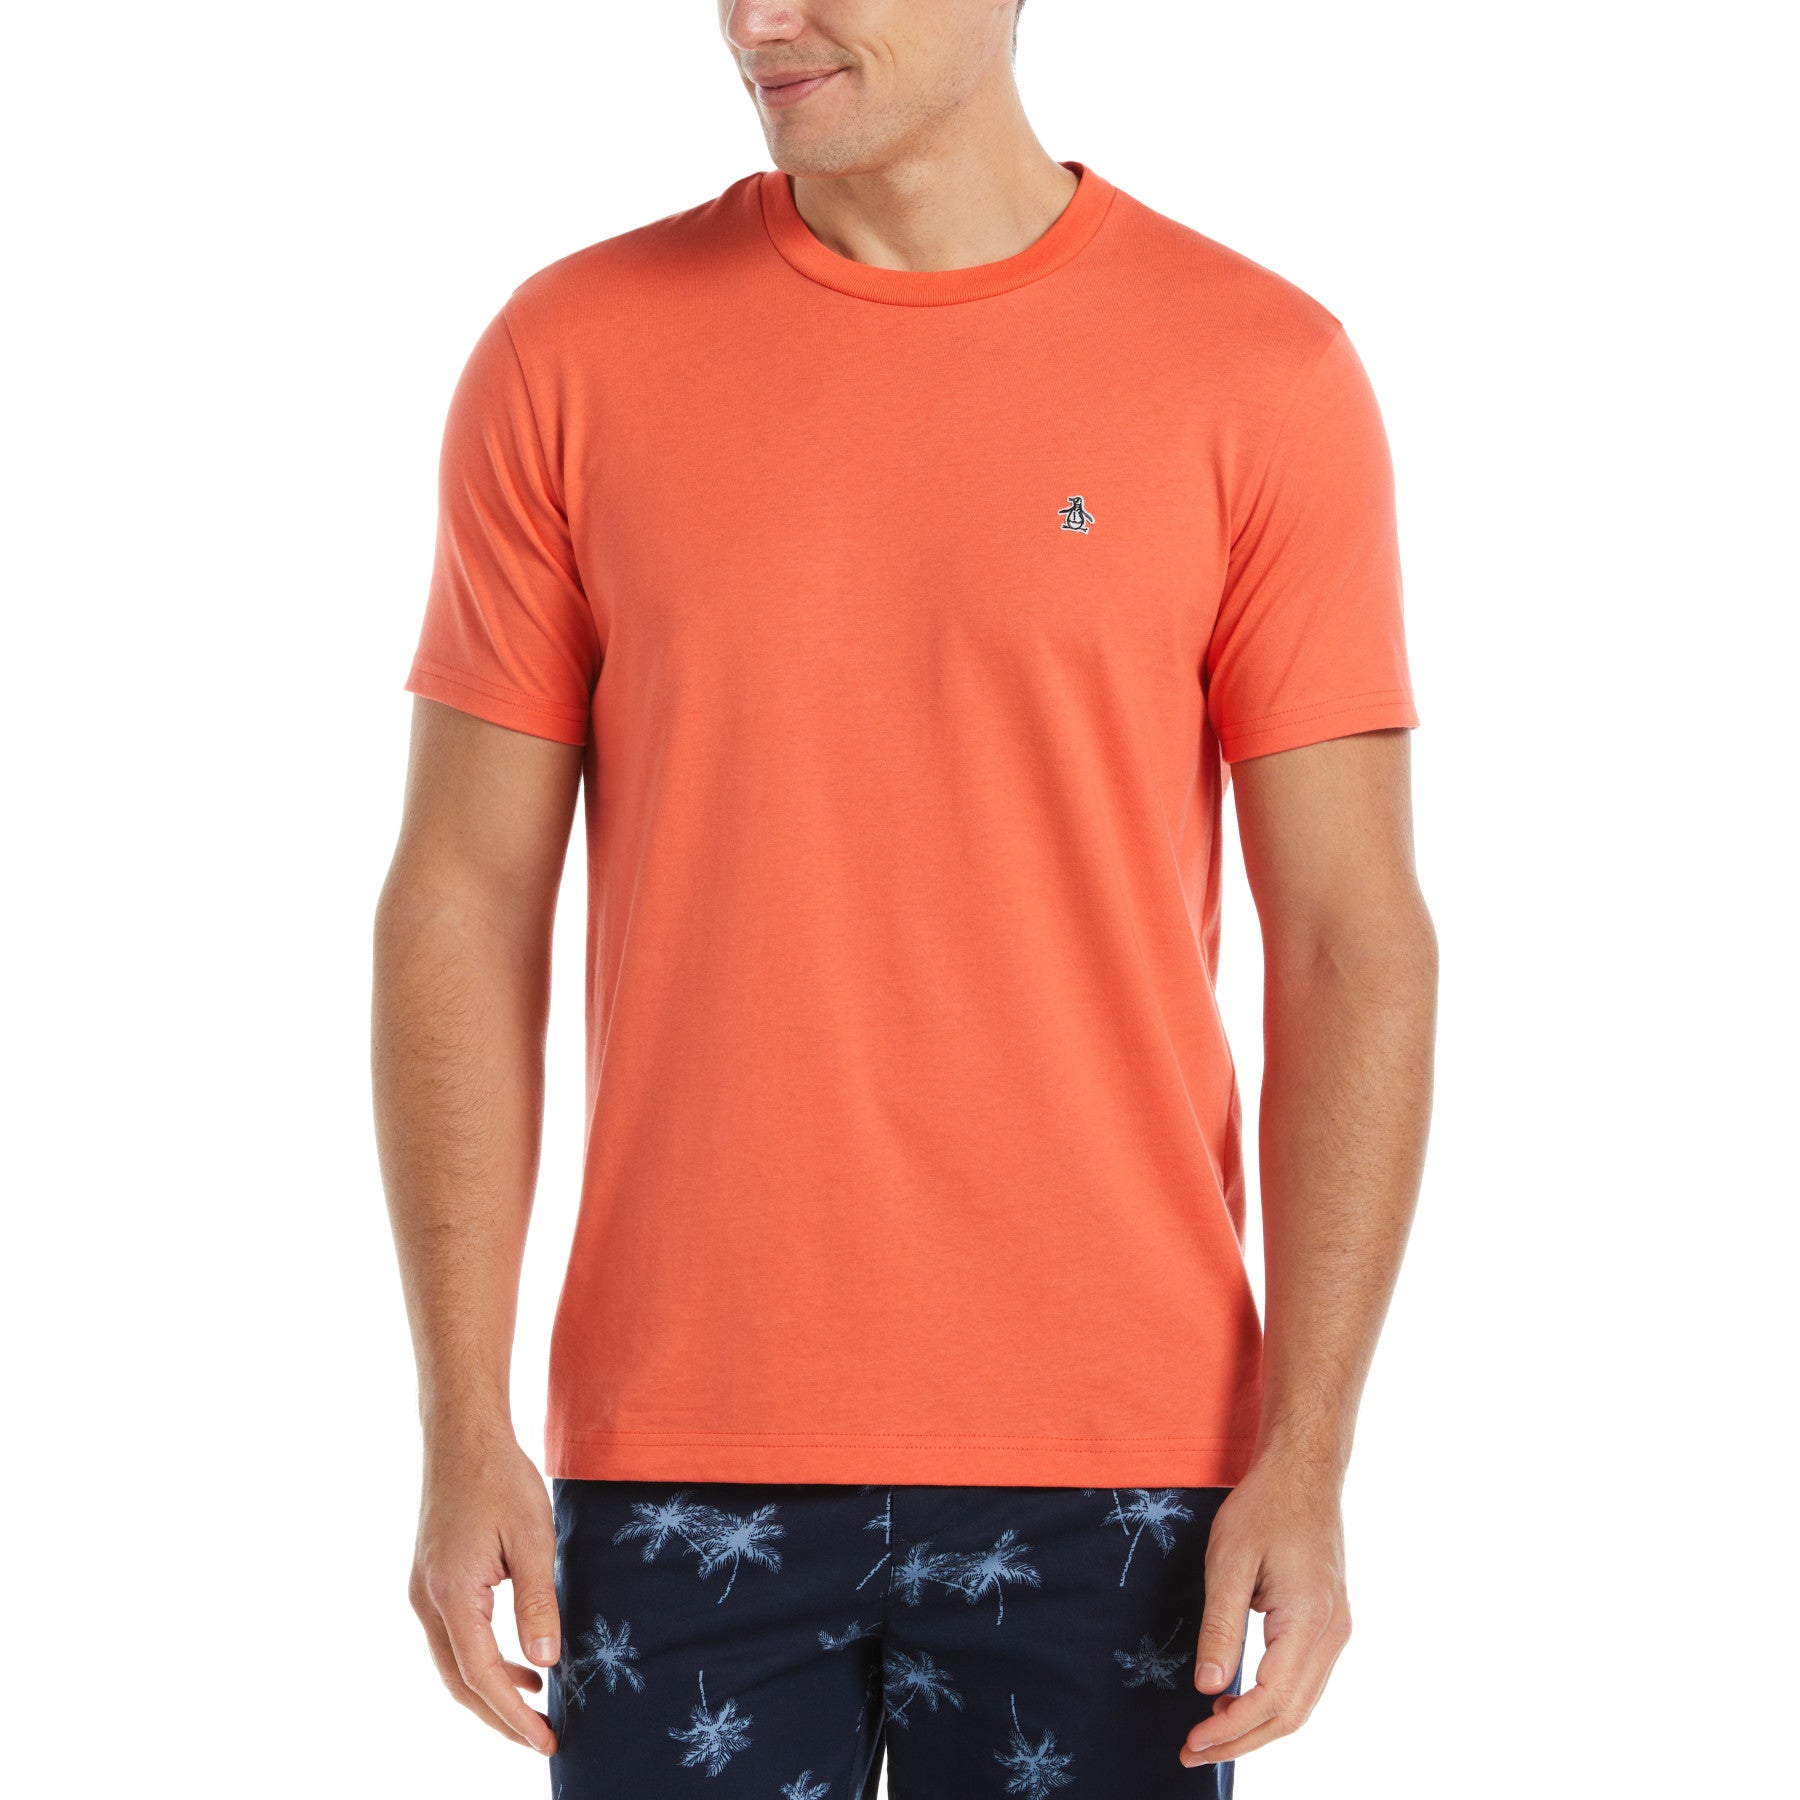 View Sticker Pete Organic Cotton TShirt In Hot Coral information